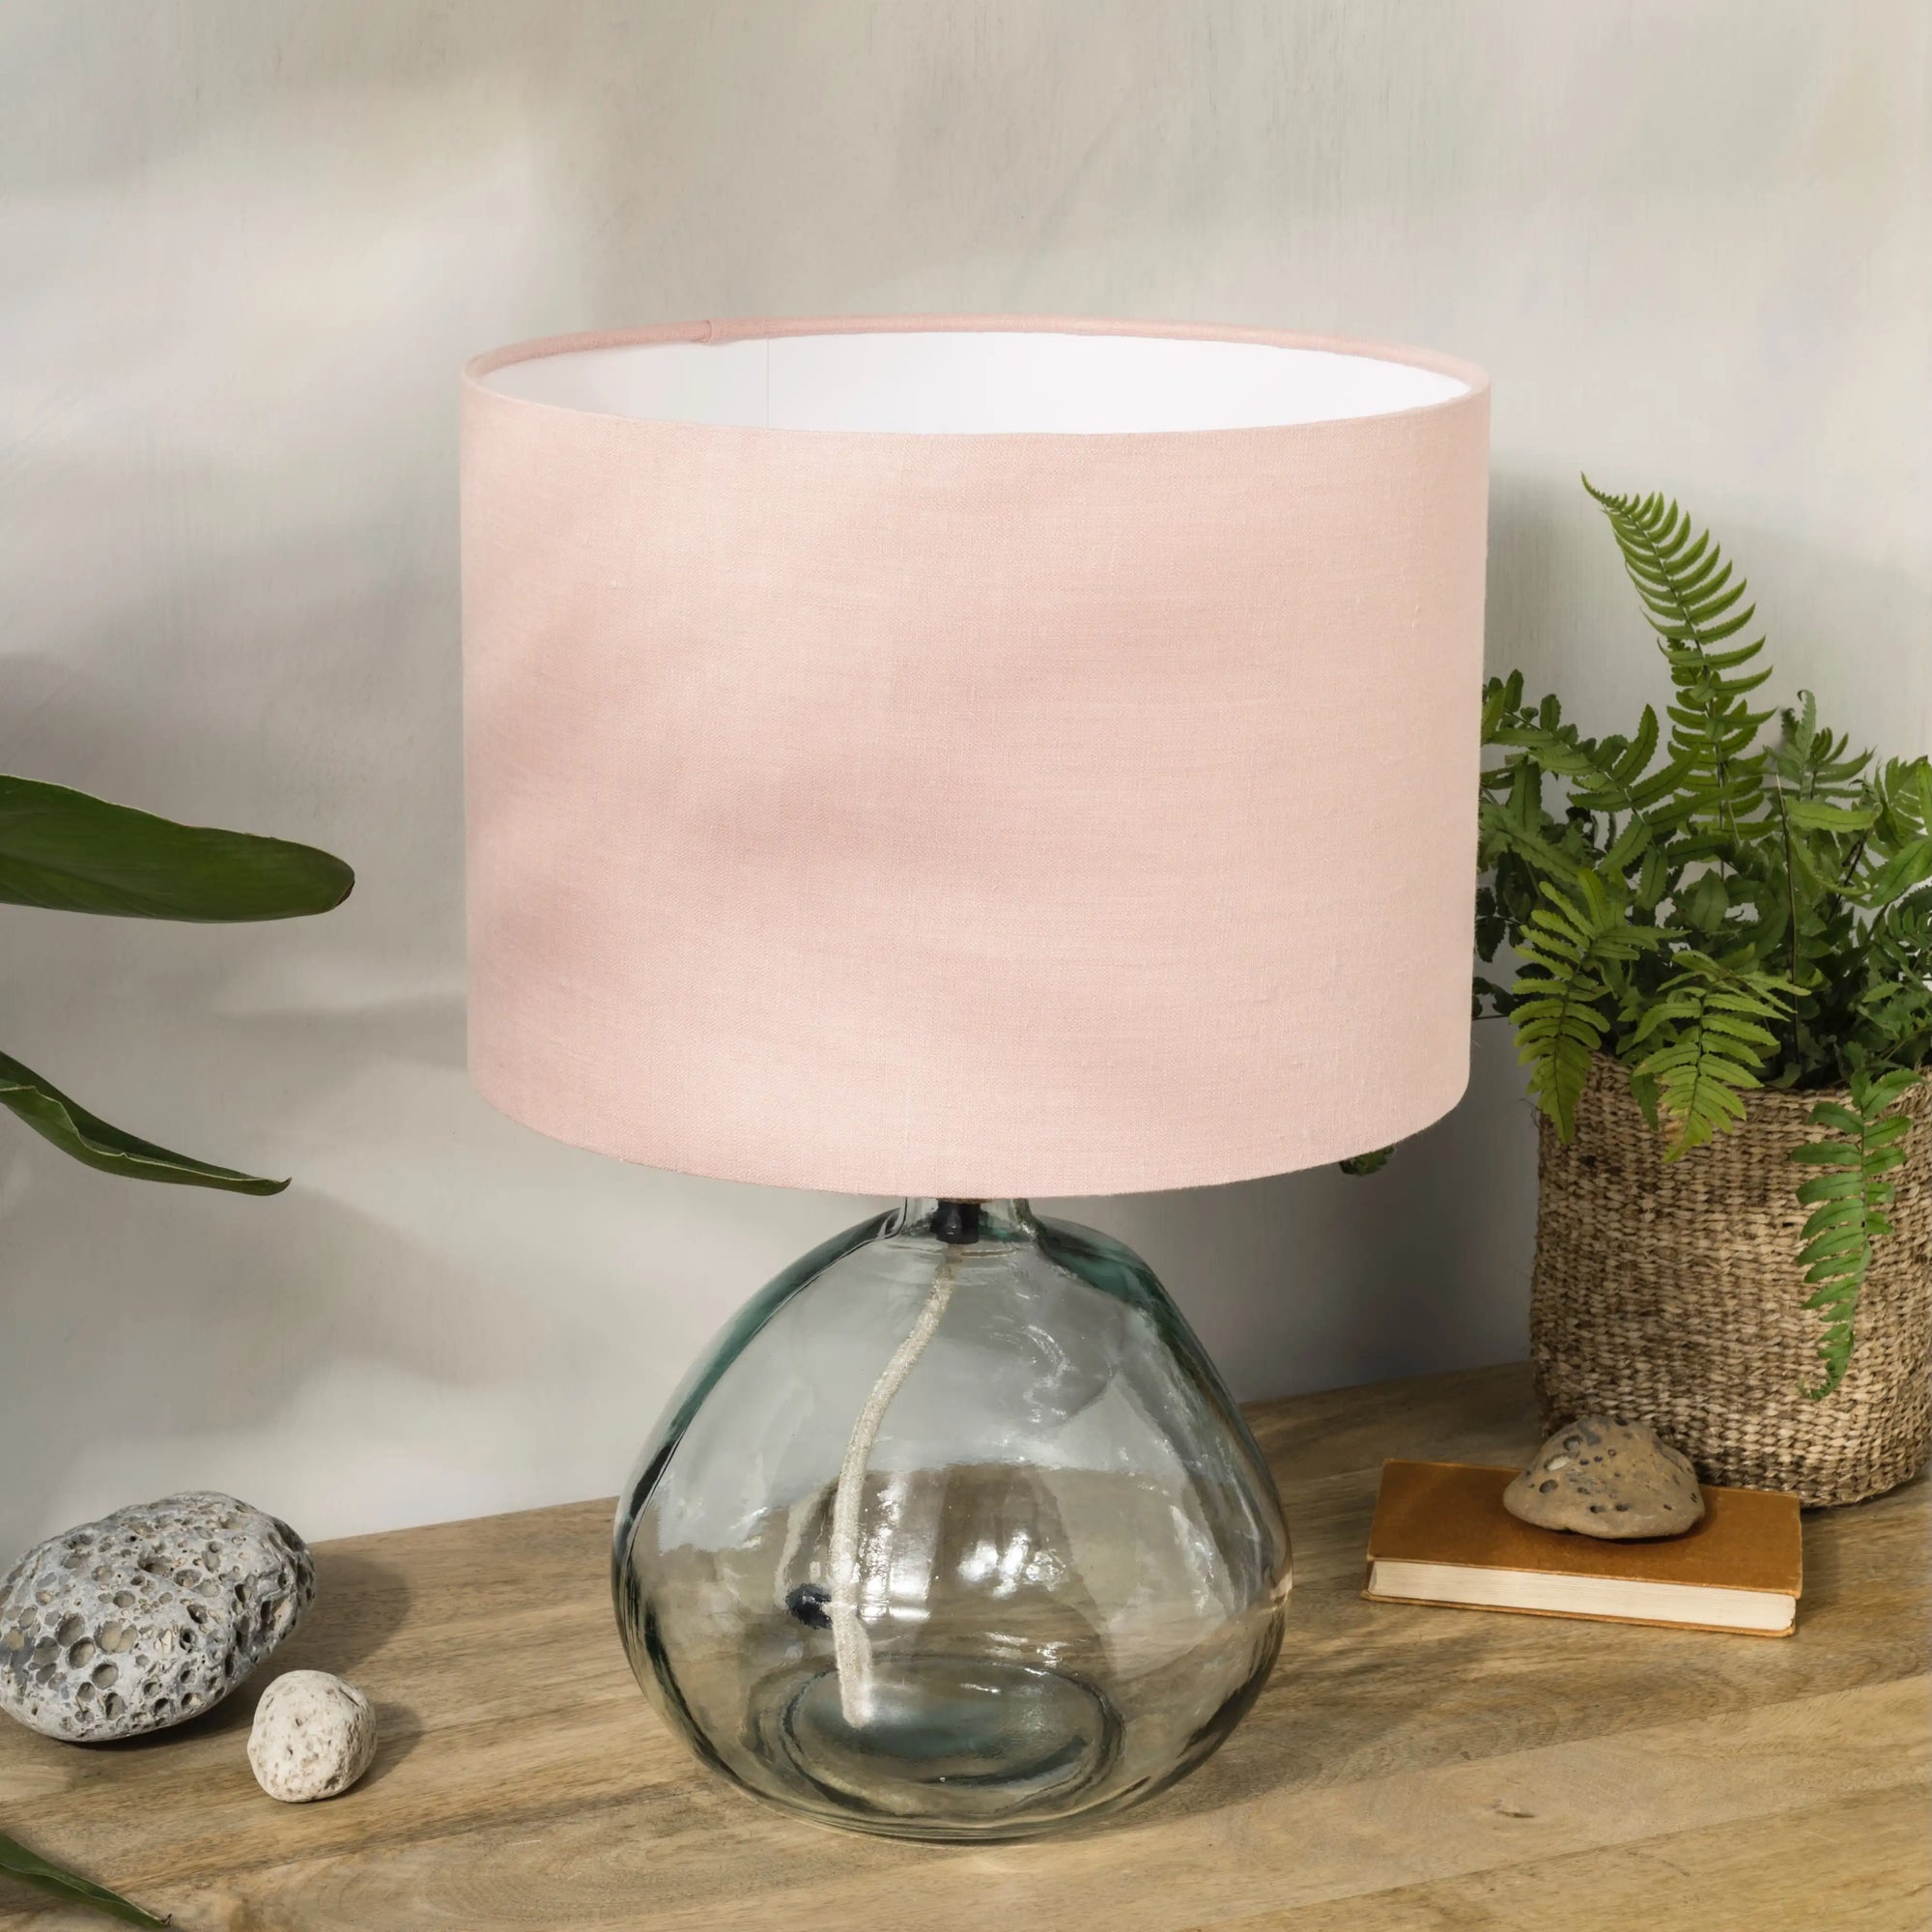 Blush pink lampshade on recycled glass base with baskets of plants